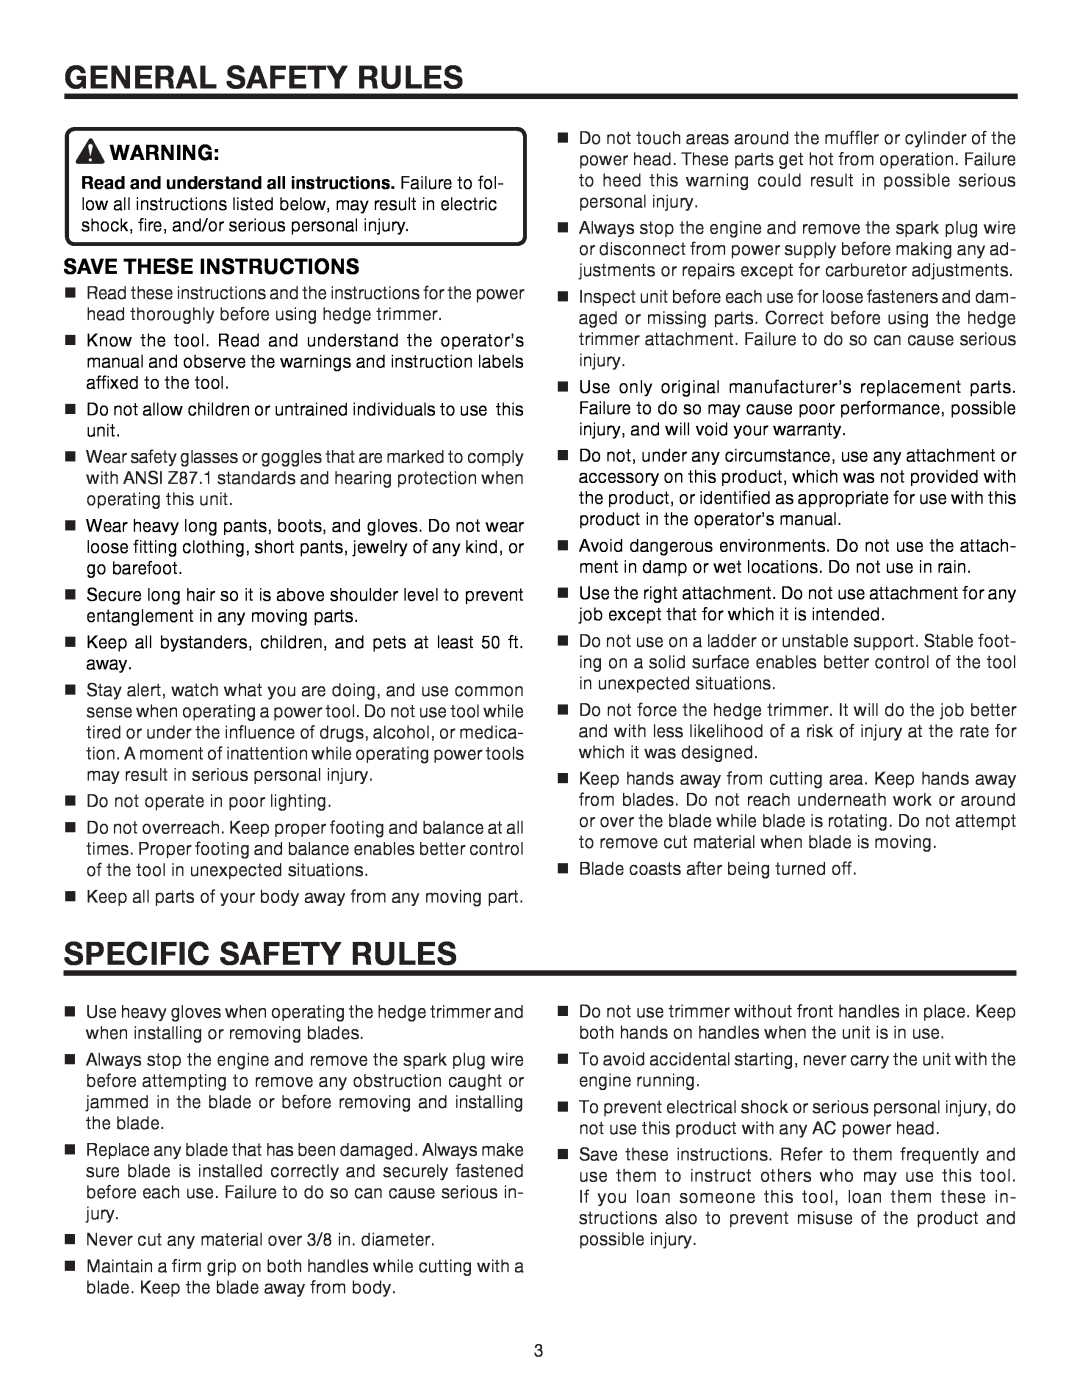 Ryobi UT15703A manual General Safety Rules, Specific Safety Rules, Save These Instructions 